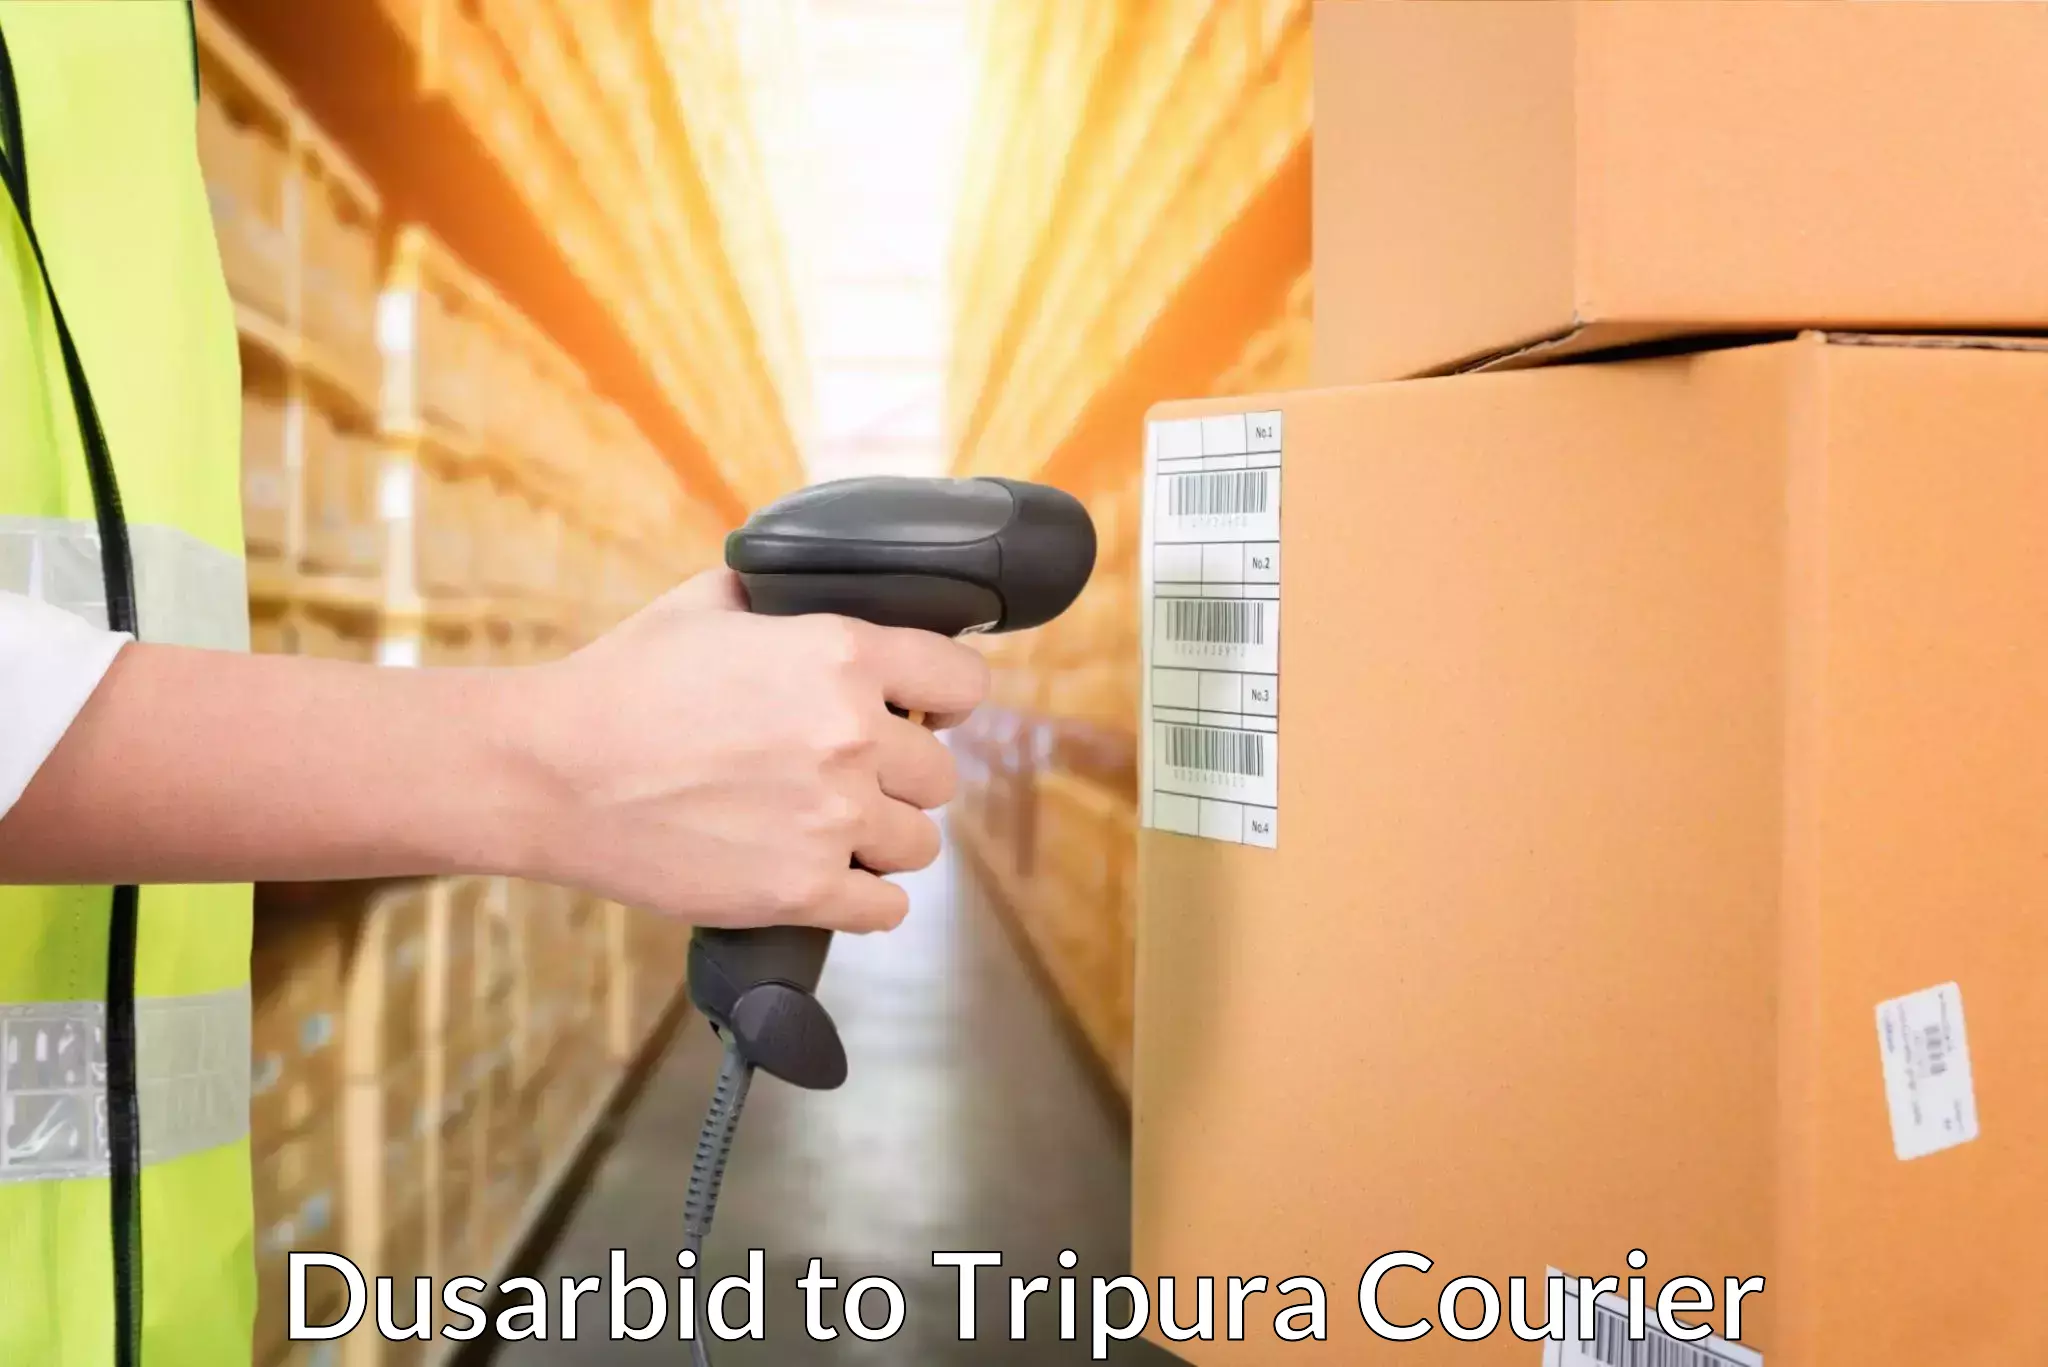 Express shipping in Dusarbid to Udaipur Tripura